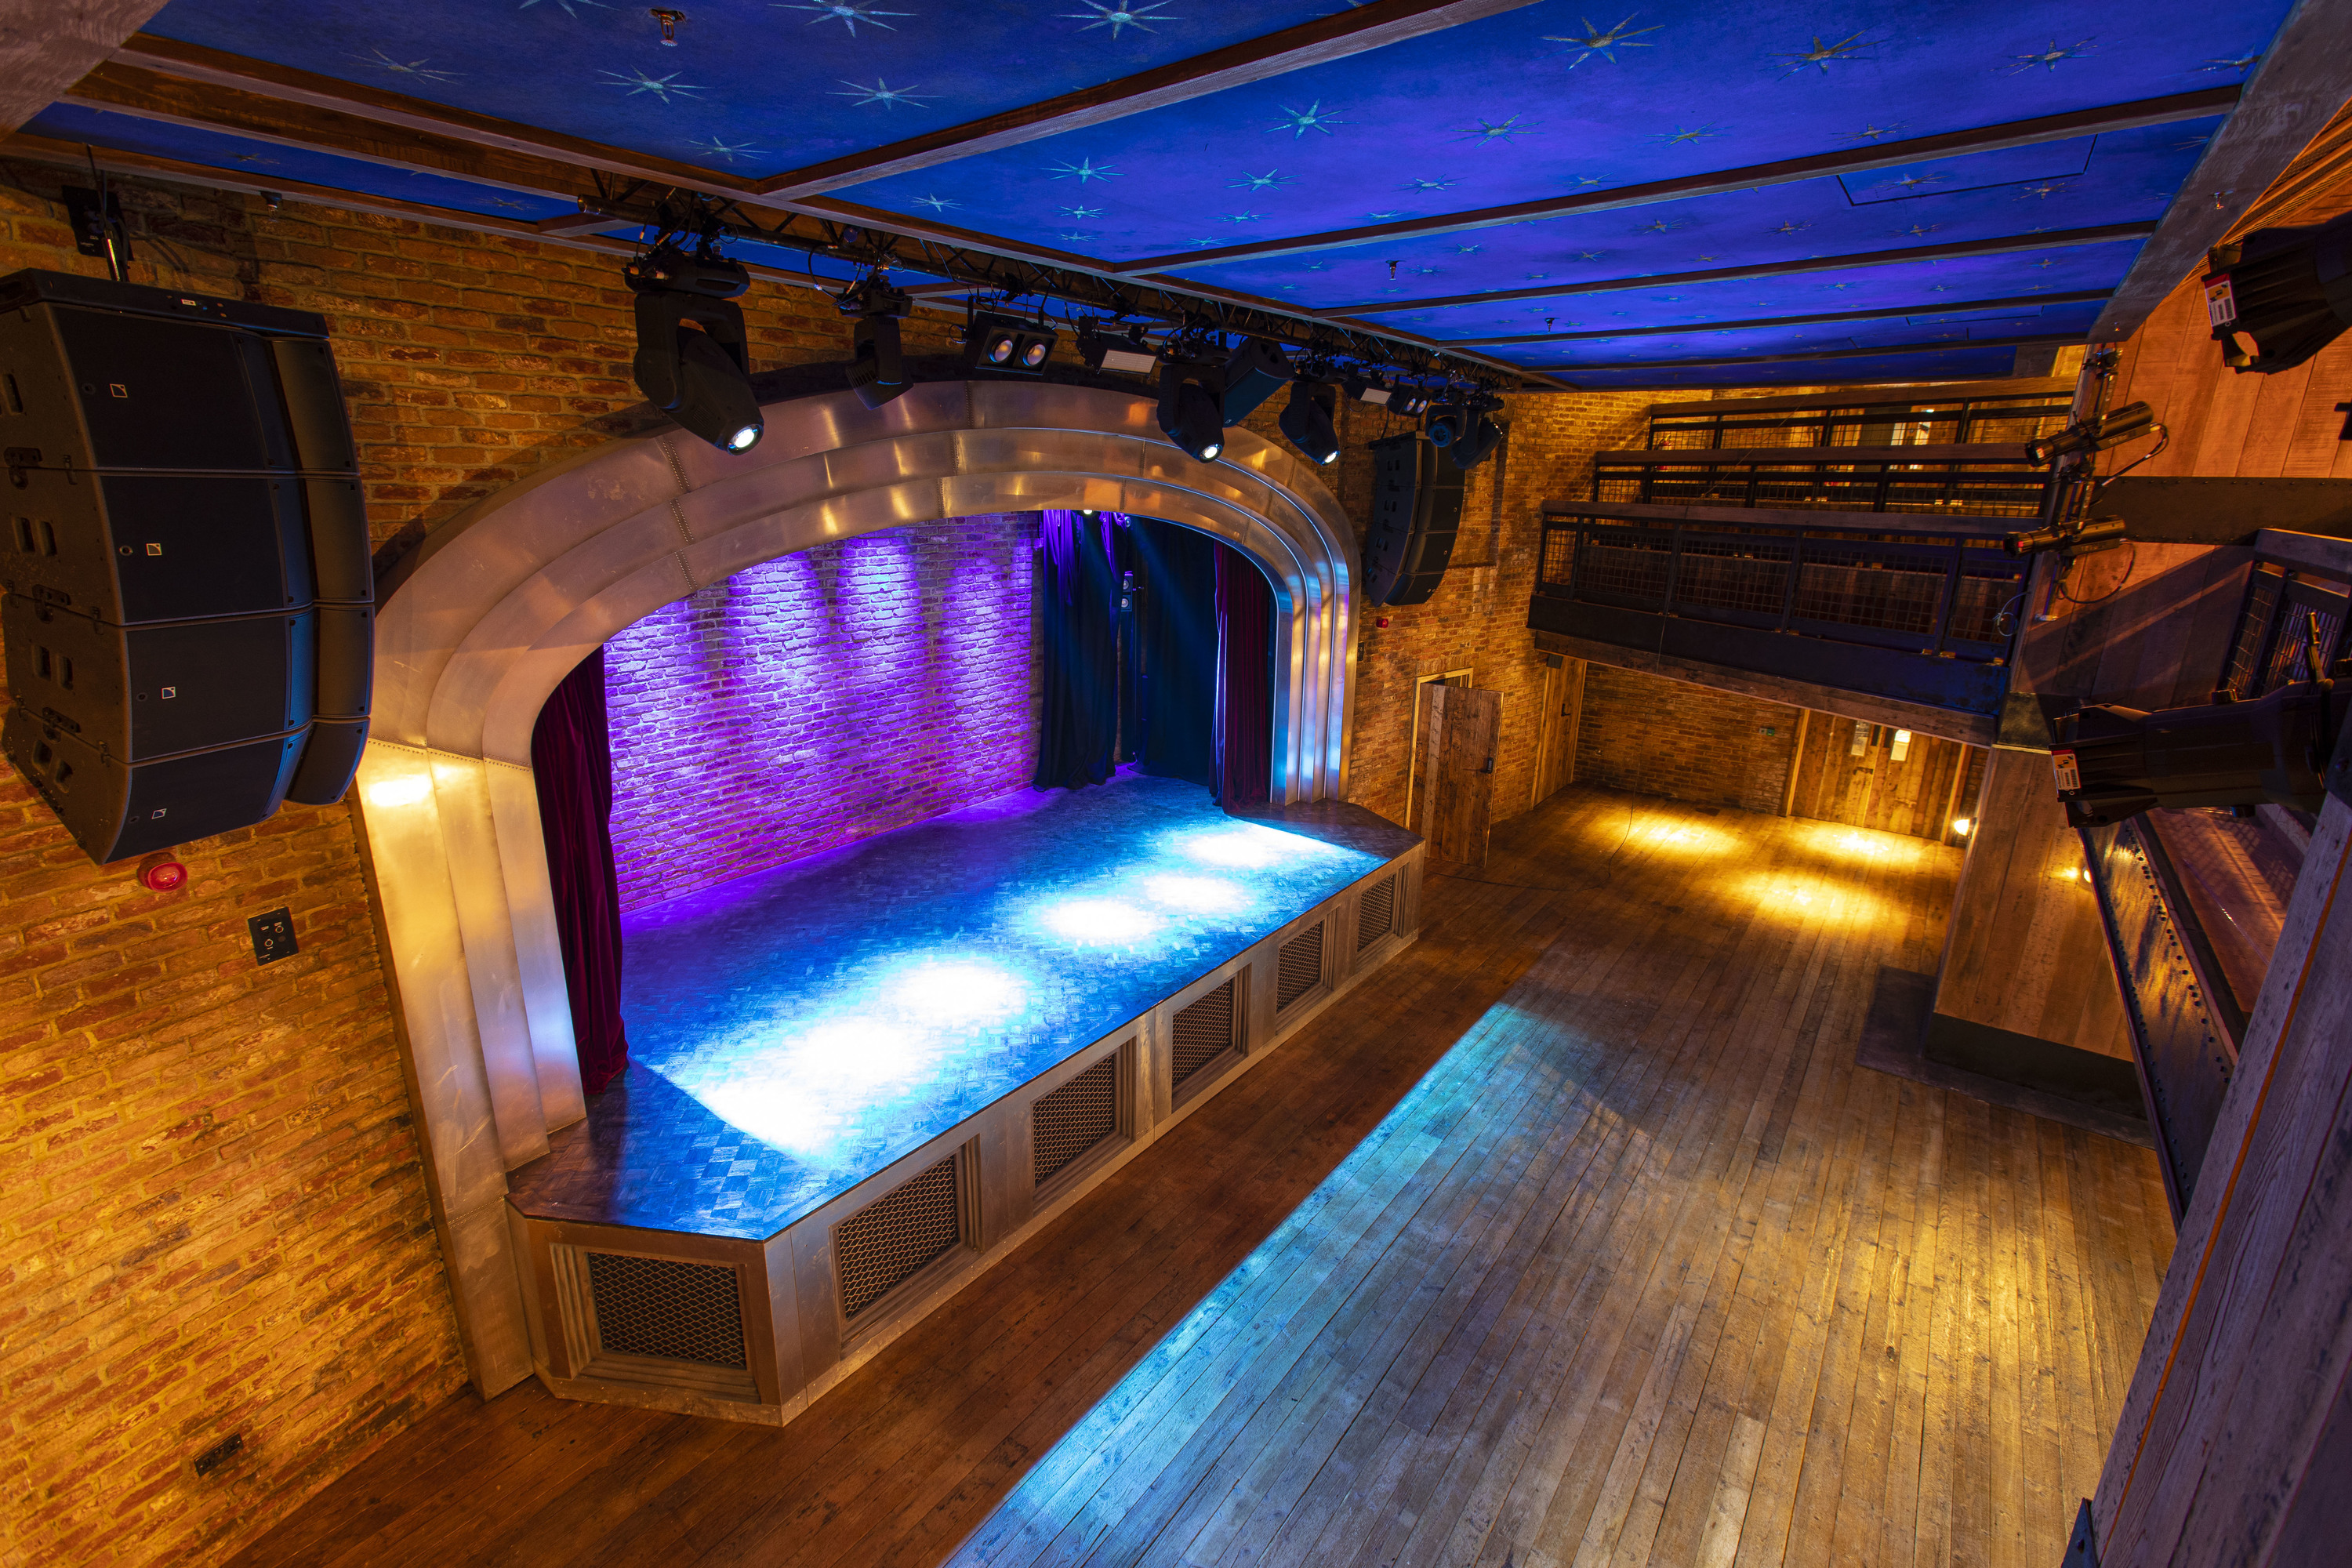 This sweet music venue just opened in King's Cross